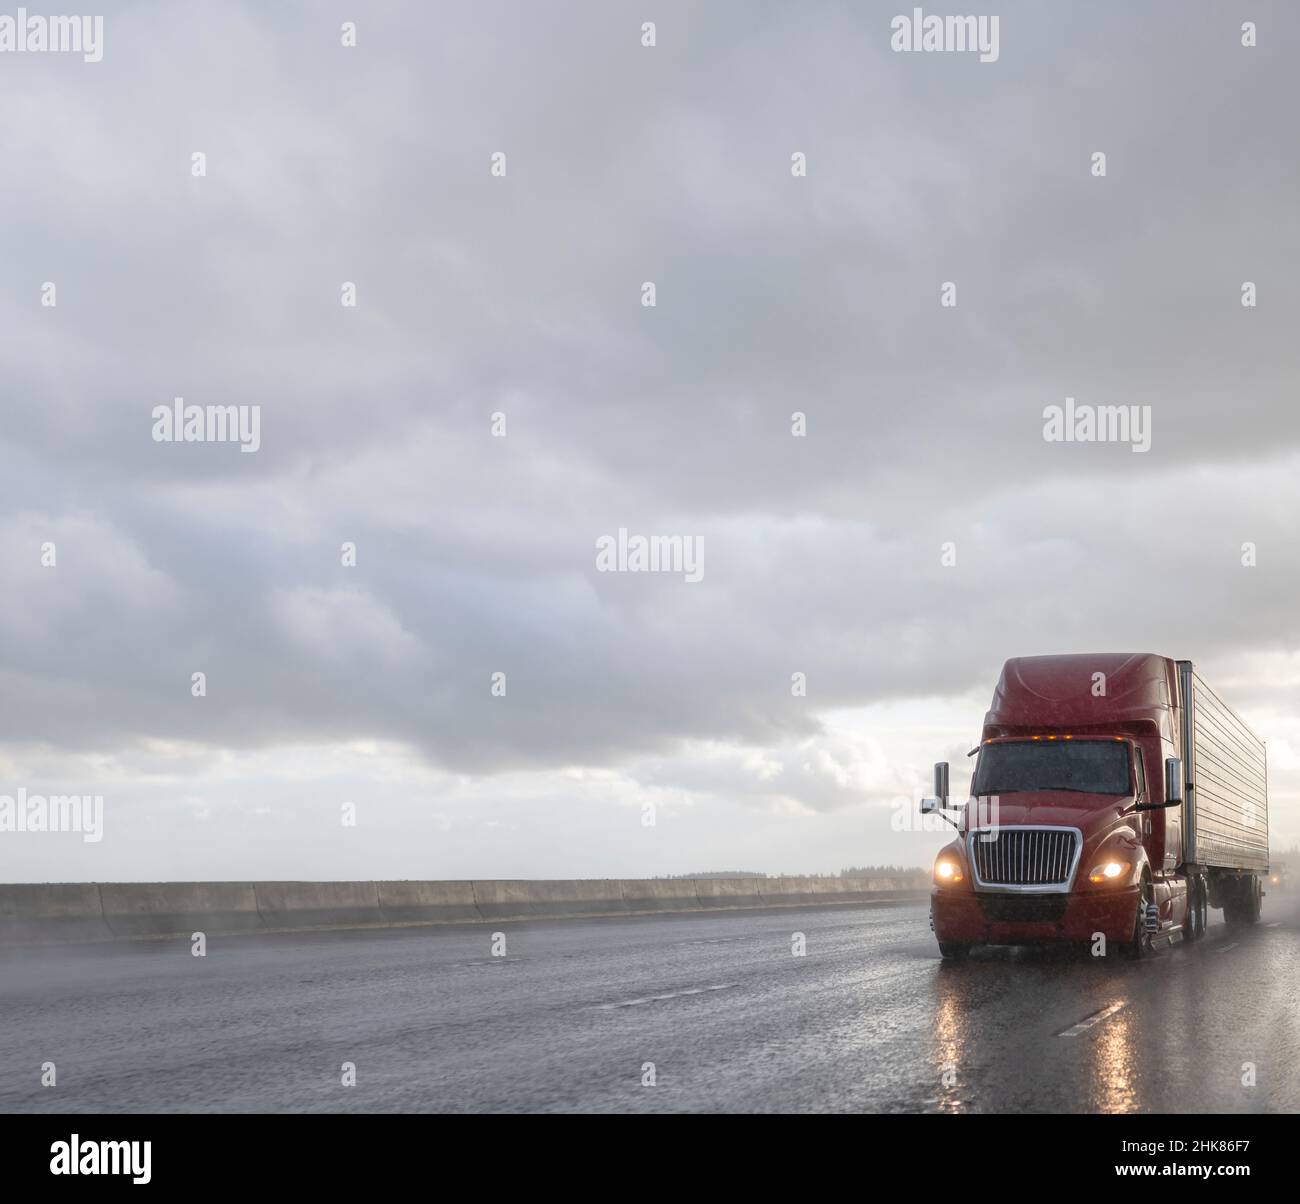 Bright red industrial big rig semi truck tractor for long haul transporting cargo on refrigerator semi trailer driving on the wide highway road with w Stock Photo